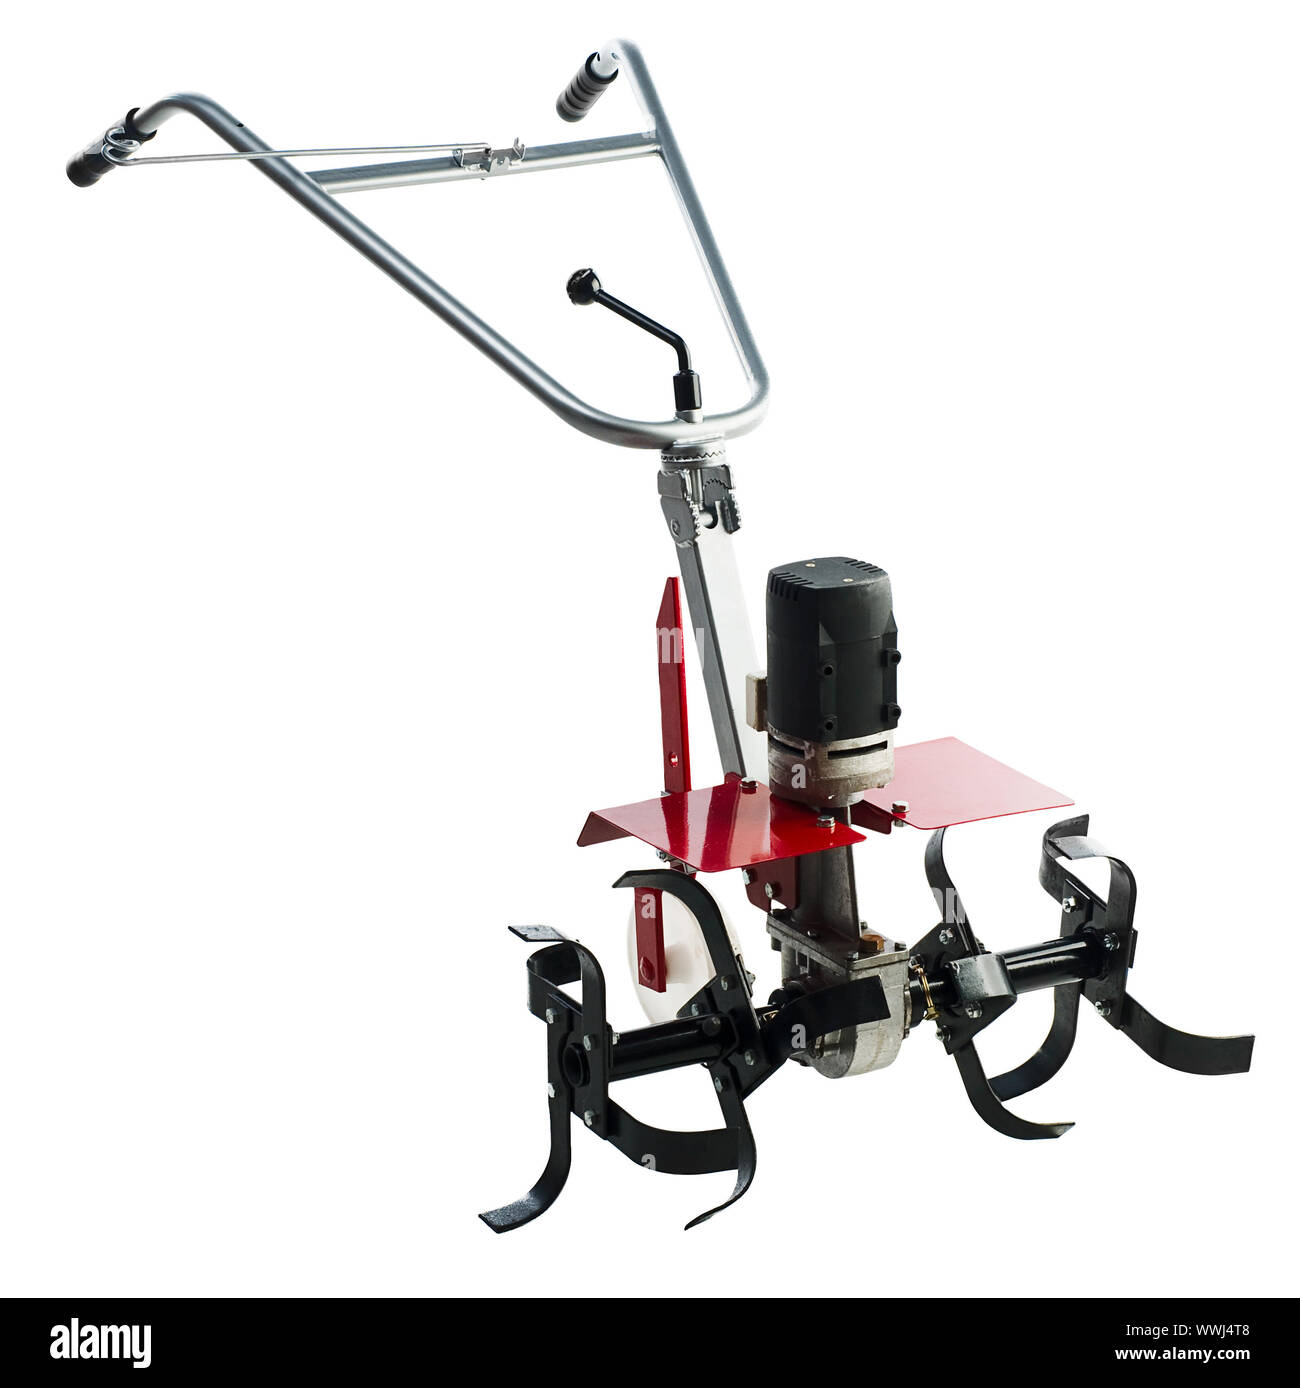 Red rototiller cultivator isolated on white background Stock Photo